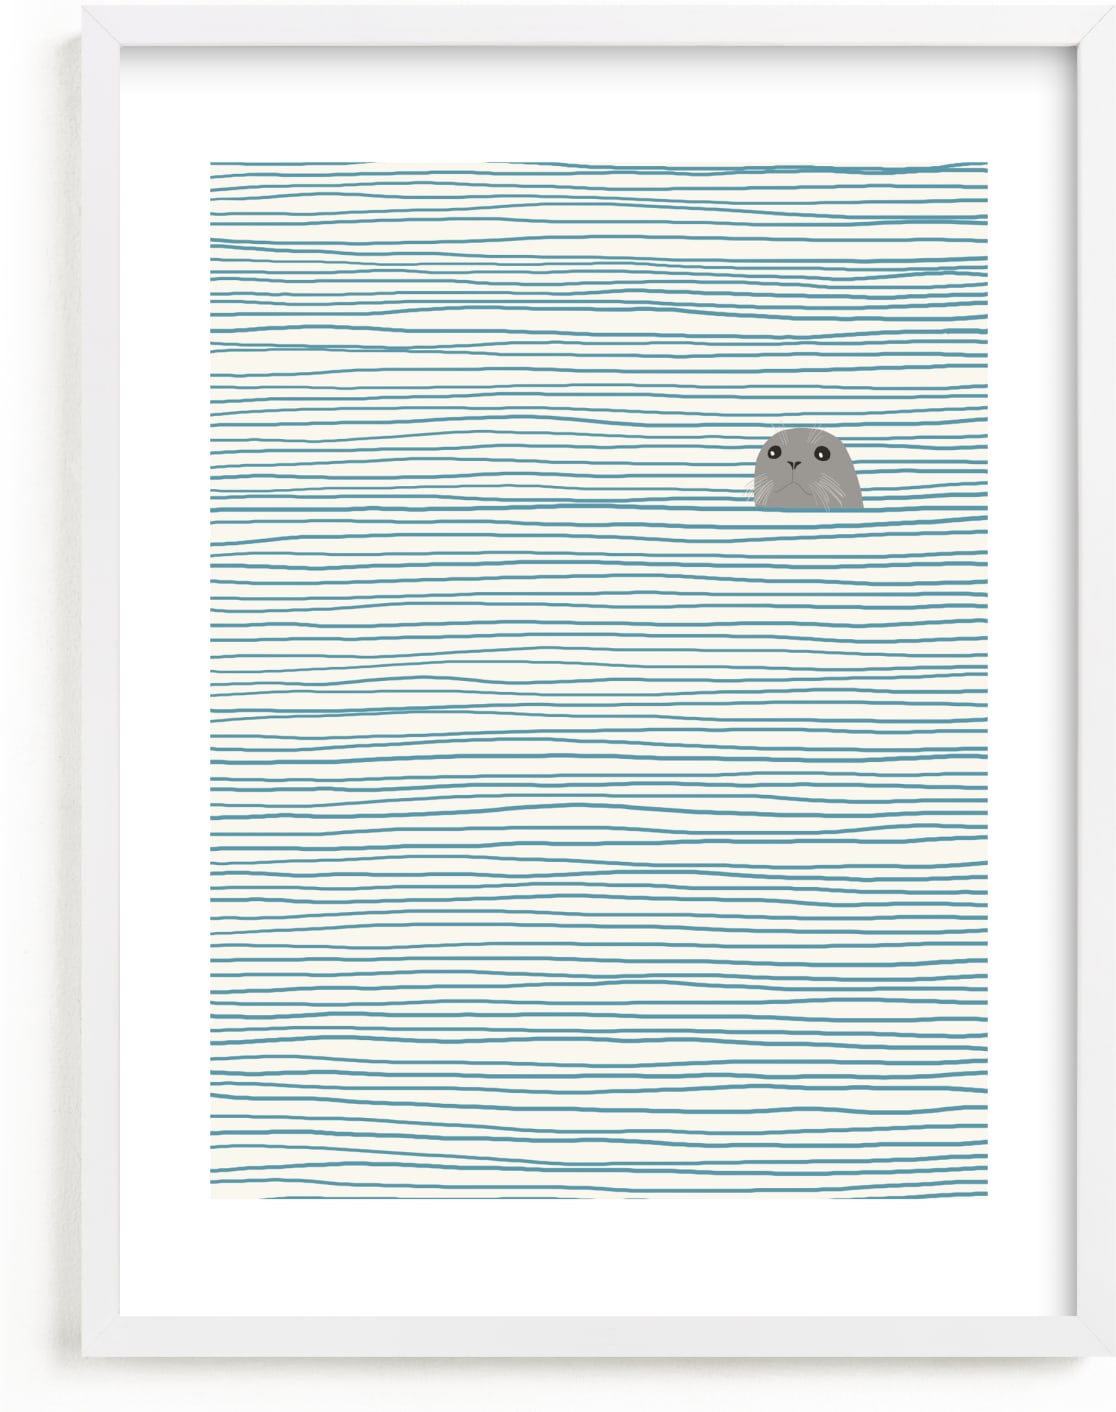 This is a blue kids wall art by Jorey Hurley called Seal.